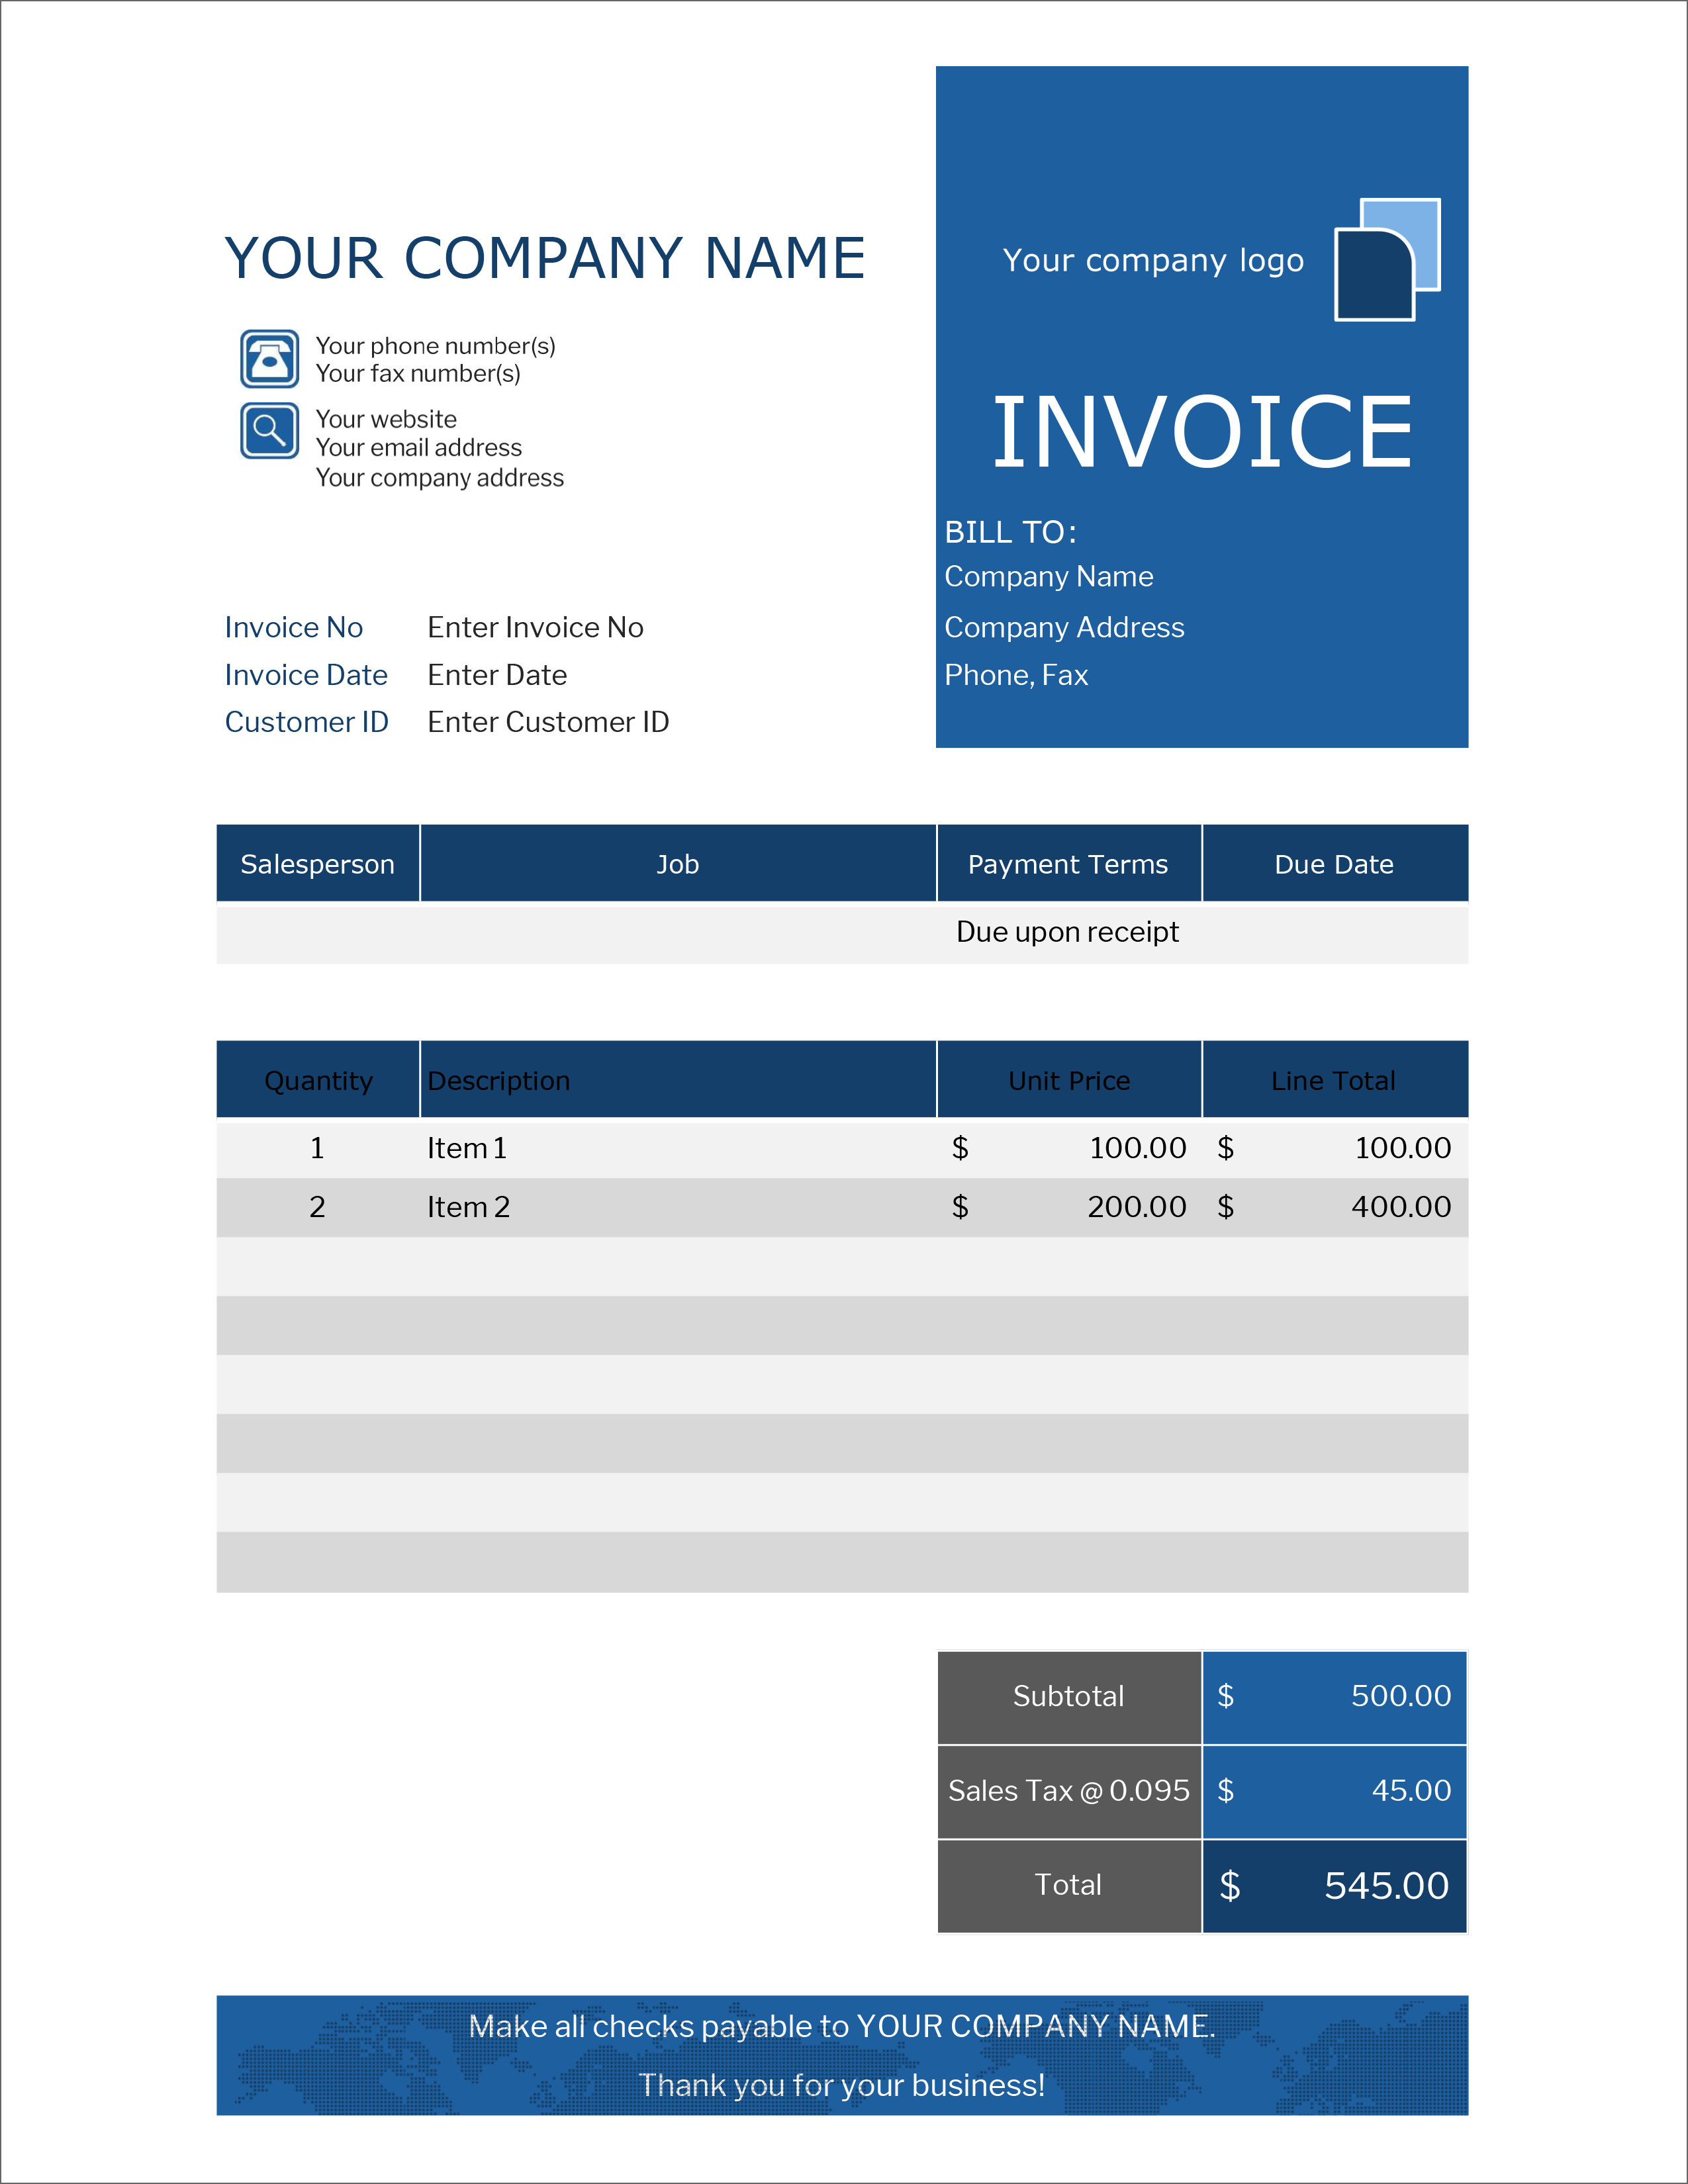 20 Simple Invoice Log Out Gif Invoice Template Ideas